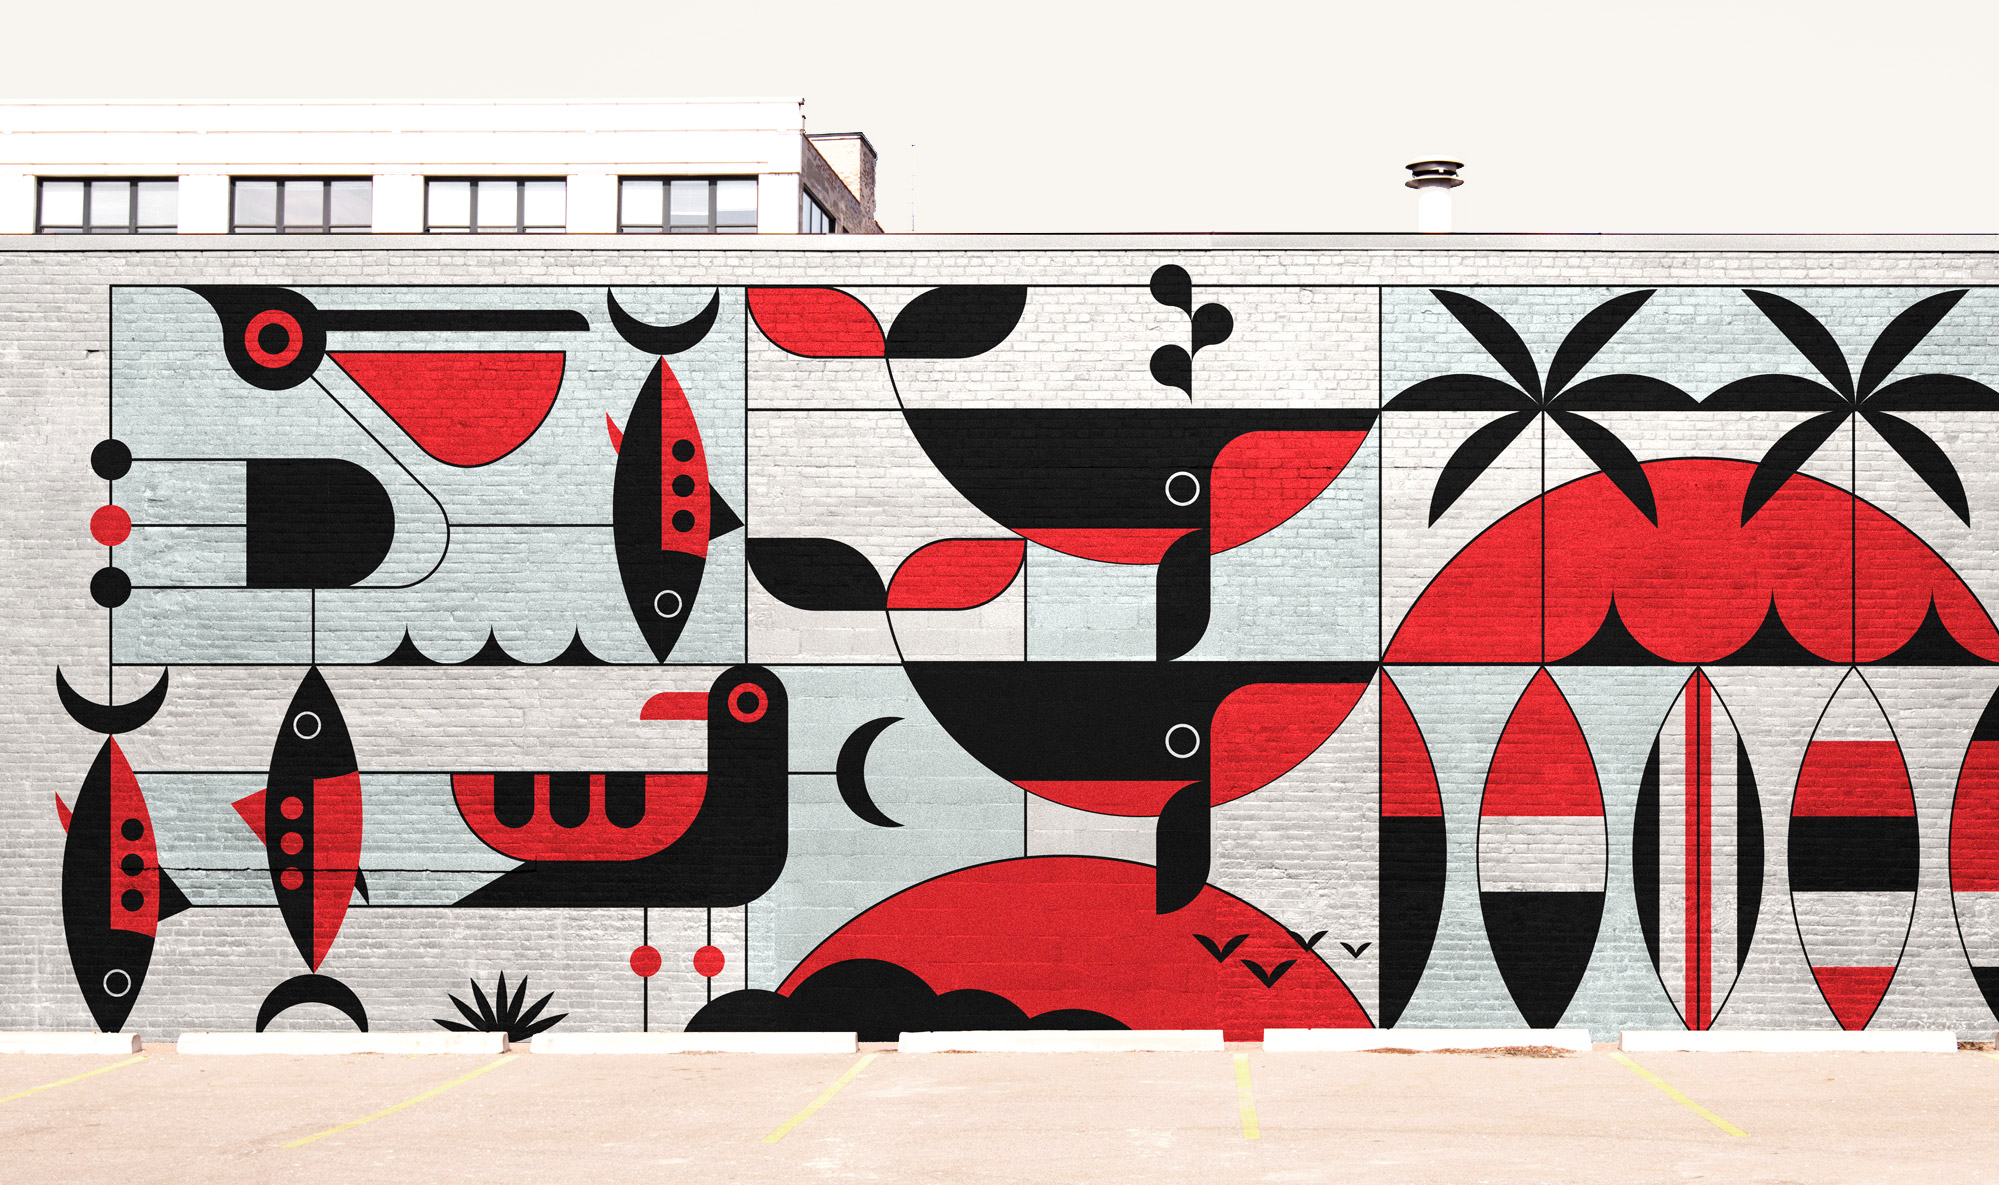 interlocking mosaic mural illustration with whales, sailboats, fish, surfboards, sun set, pelicans, birds and palm trees in red and black and pale blue on brick building